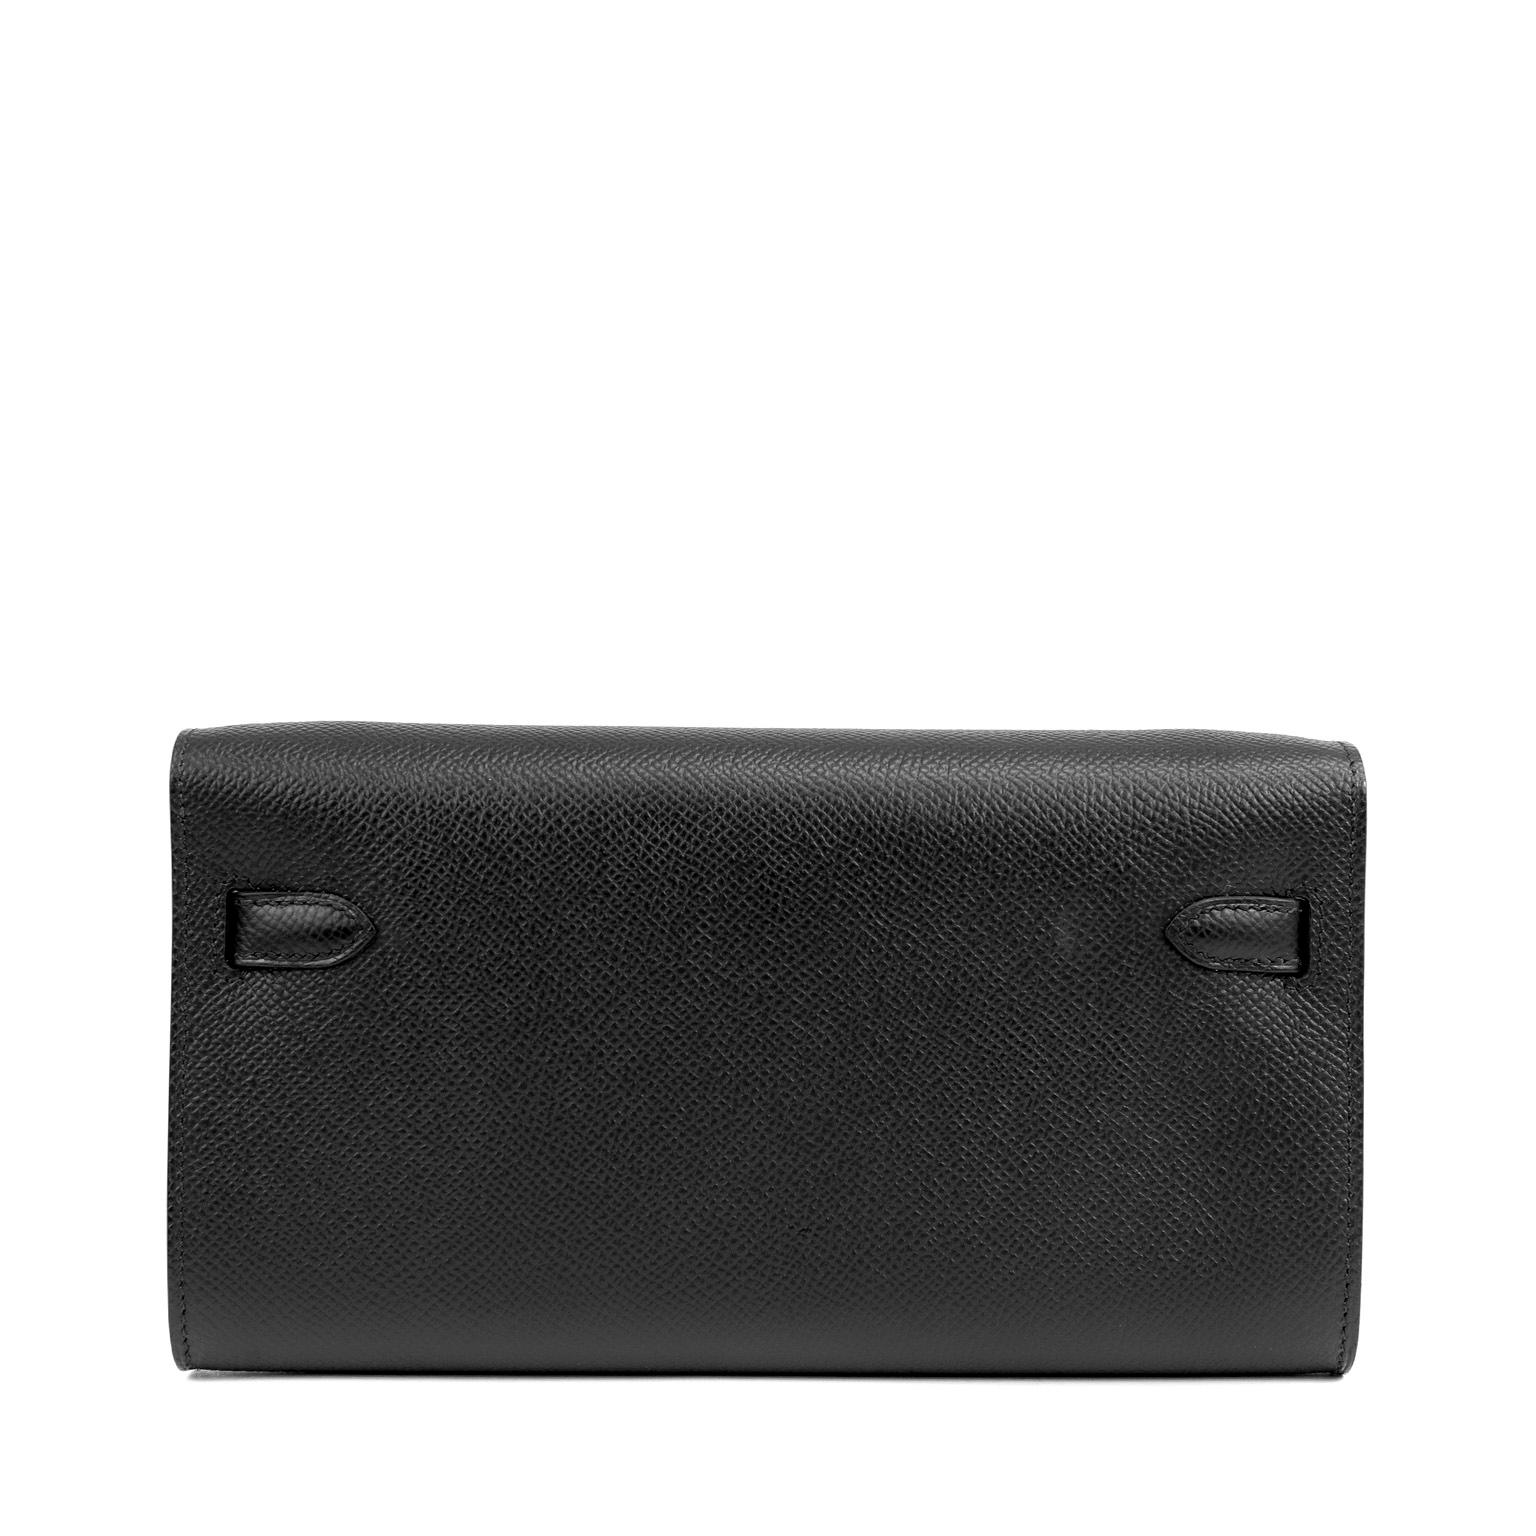 hermes kelly to go wallet